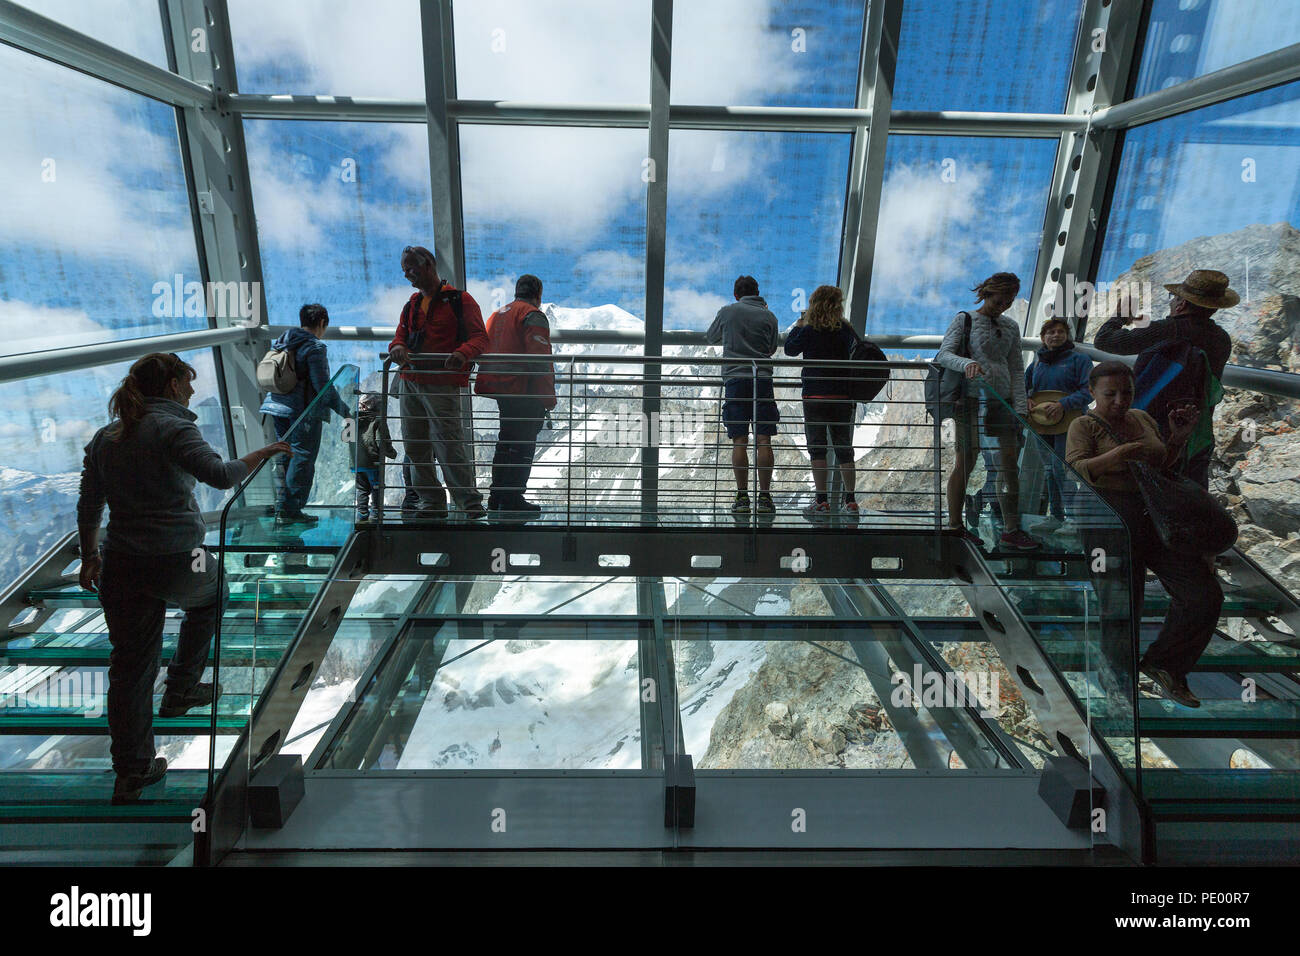 COURMAYEUR, ITALY, AUGUST 2: People enjoying the panoramic Skywow, interior of Punta Helbronner, view of Monte Bianco (Mont Blanc) massi Photo - Alamy